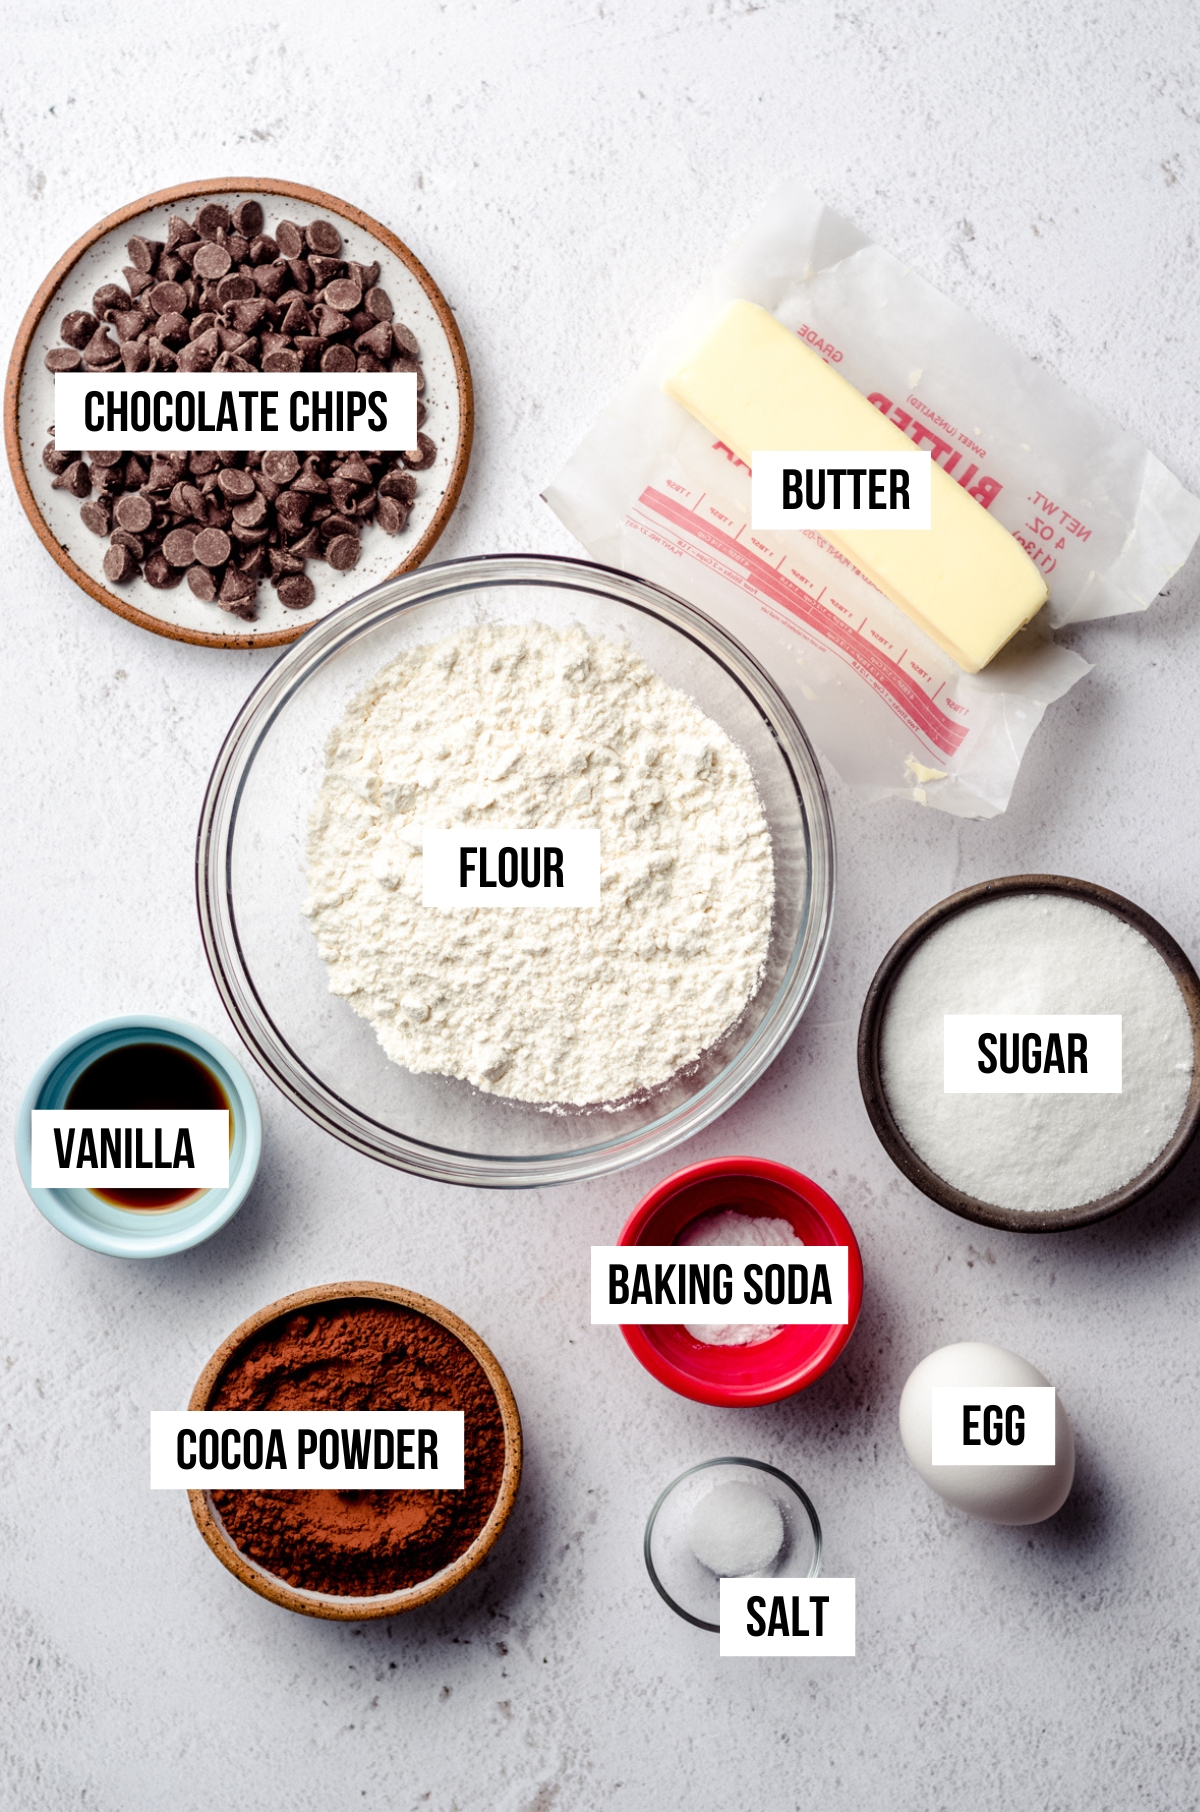 ingredients for chocolate chocolate chip cookies with ingredient label text overlay.